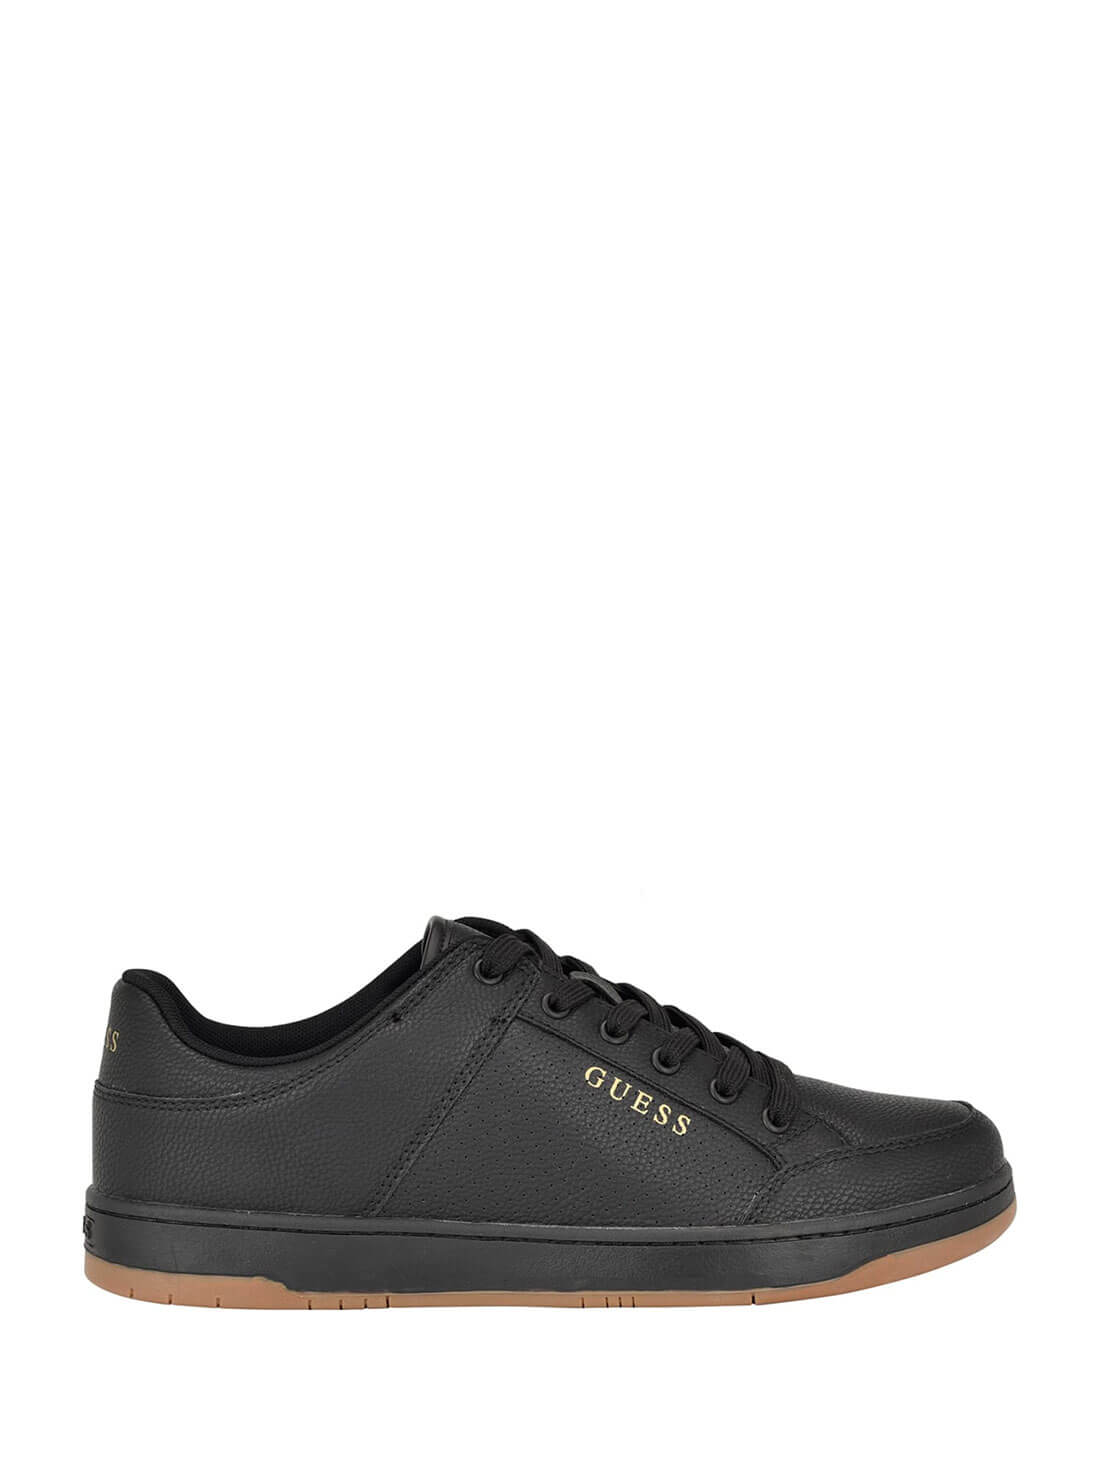 Black Tempo Sneakers | GUESS Men's Shoes | side view